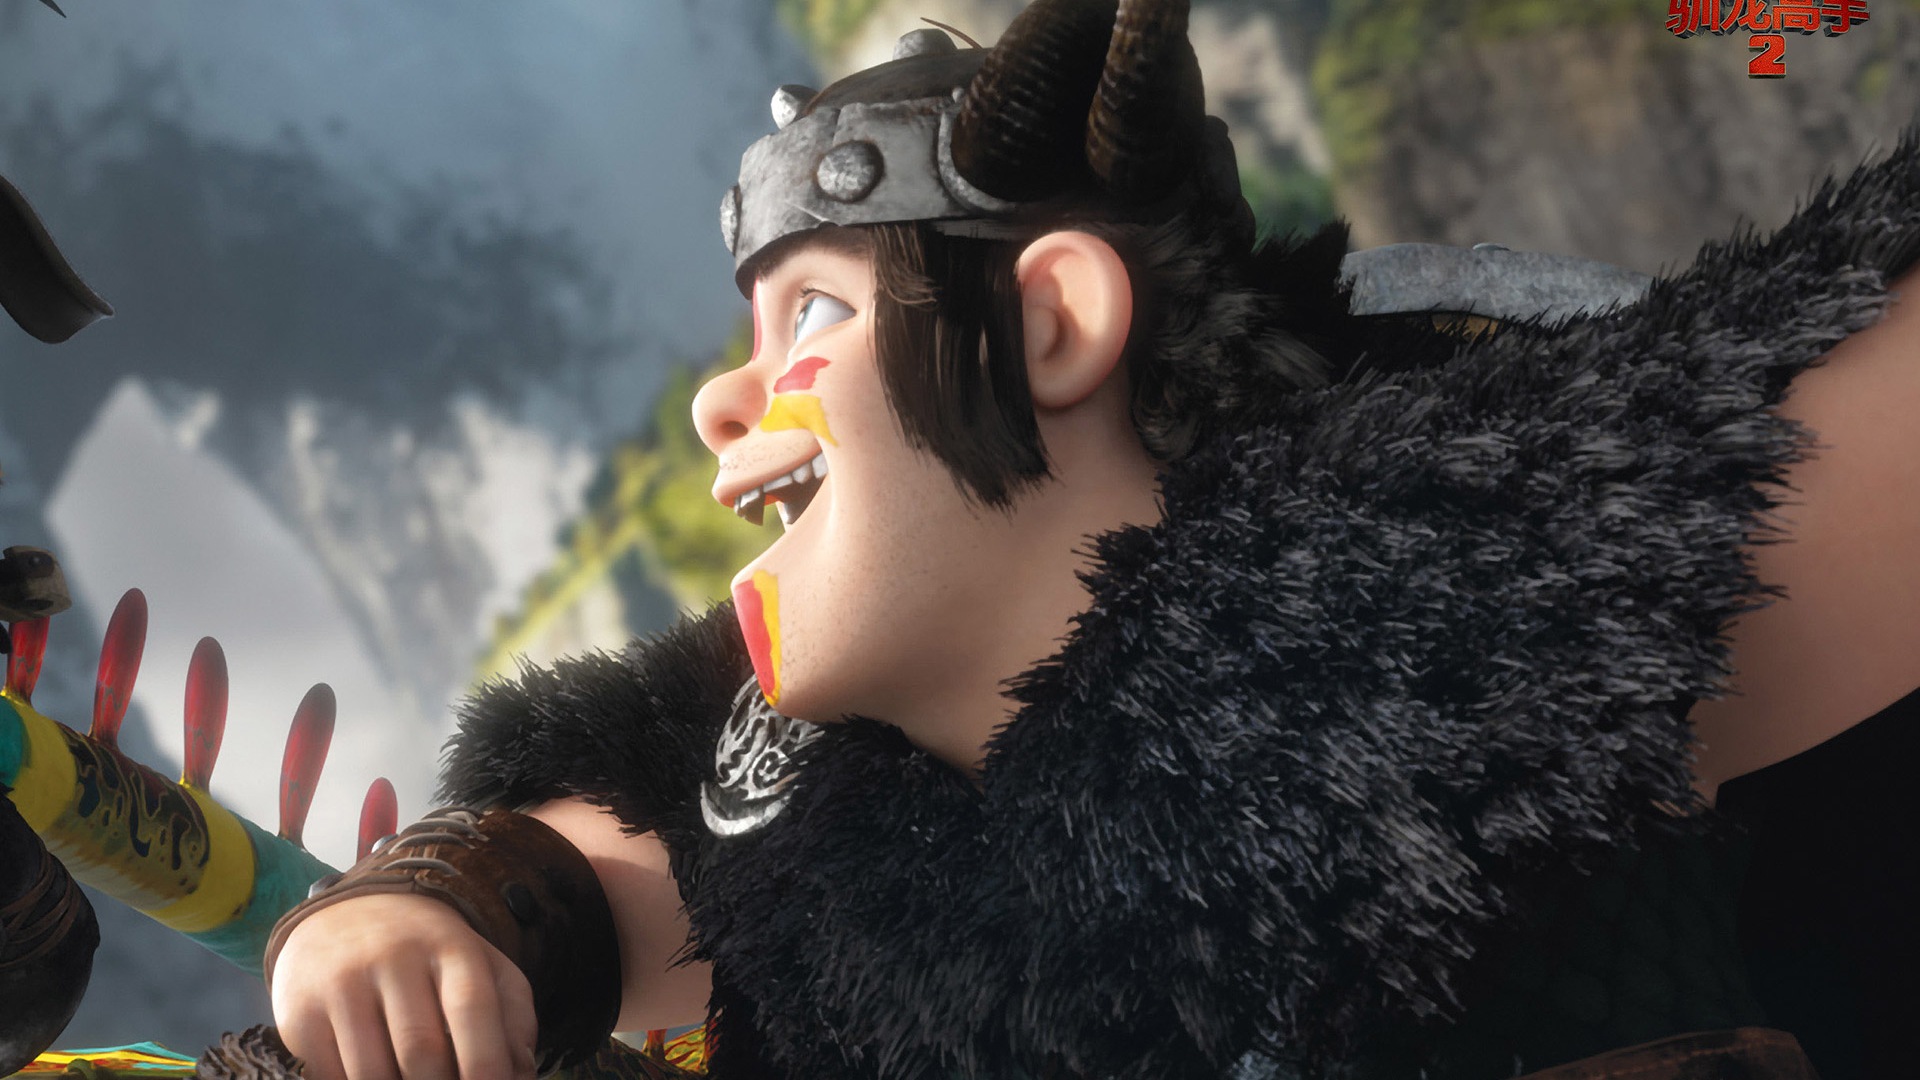 How to Train Your Dragon 2 HD wallpapers #4 - 1920x1080